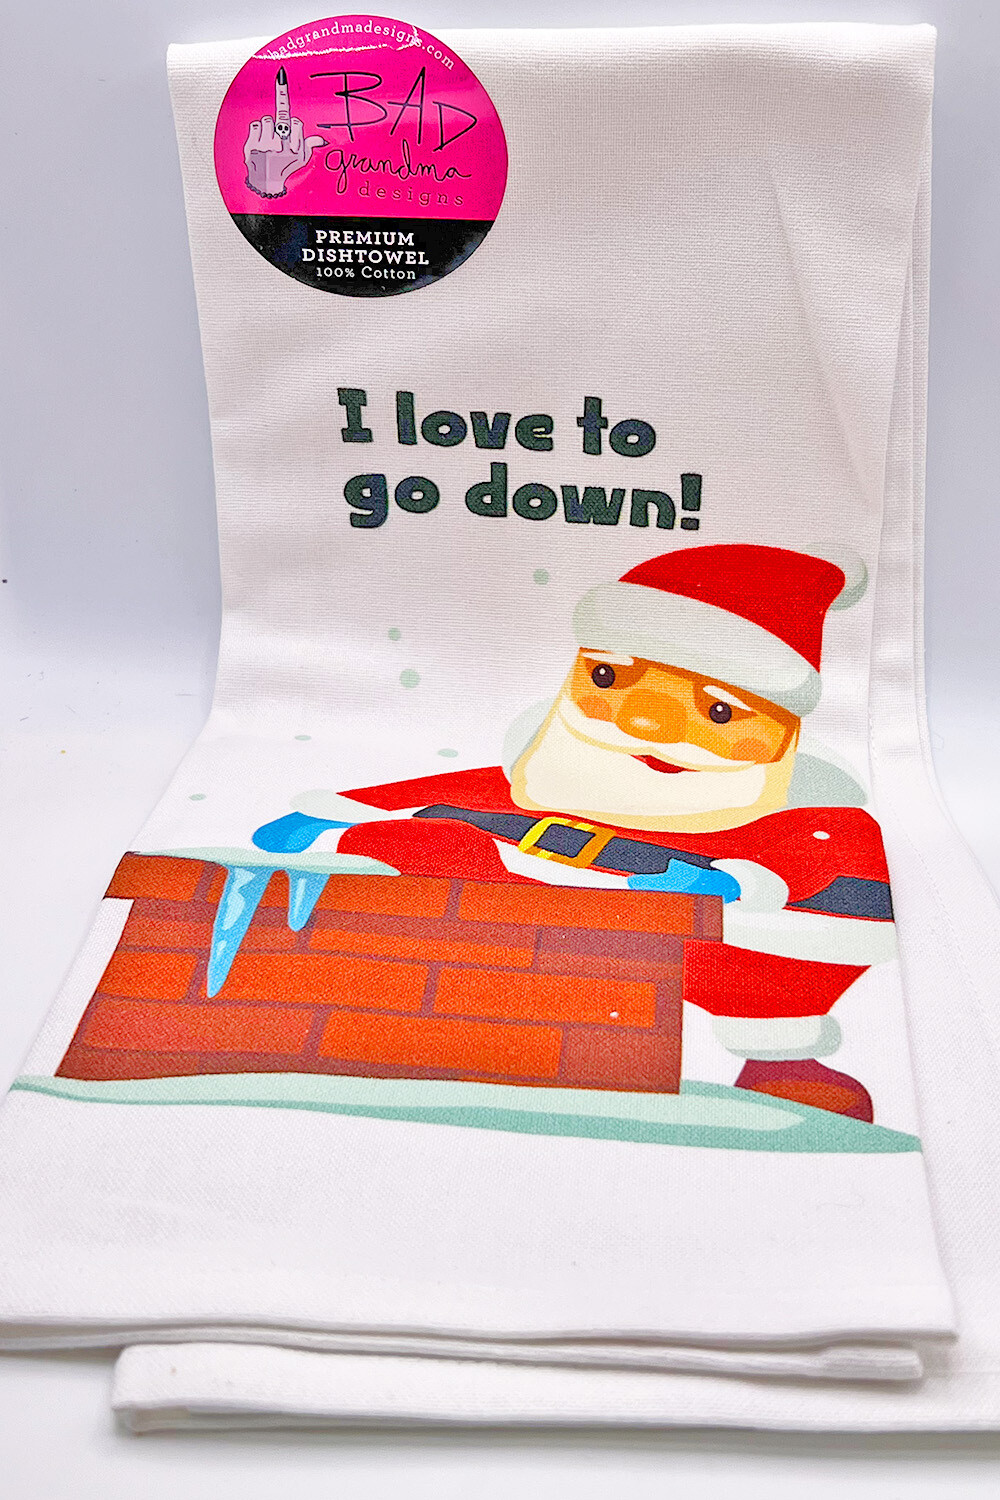 100% Cotton | Santa Clause 'I Love to Go Down' Dishtowel with Hang Loop